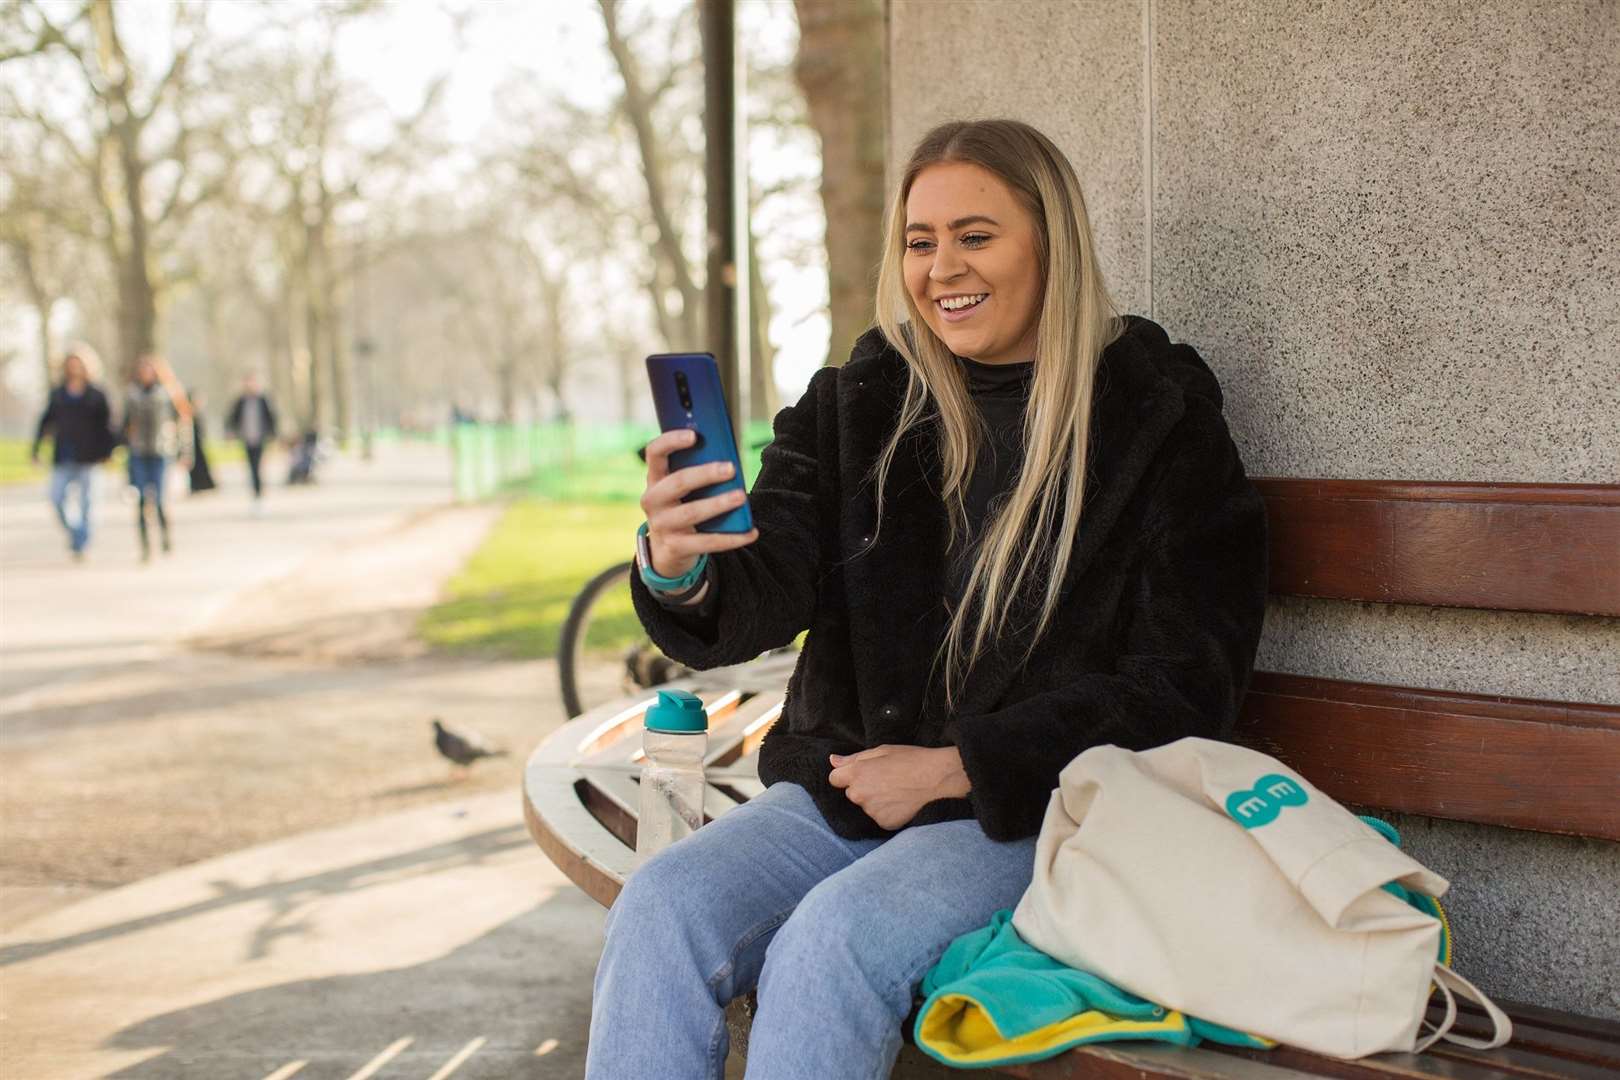 EE's 5G service is now live in Gravesend